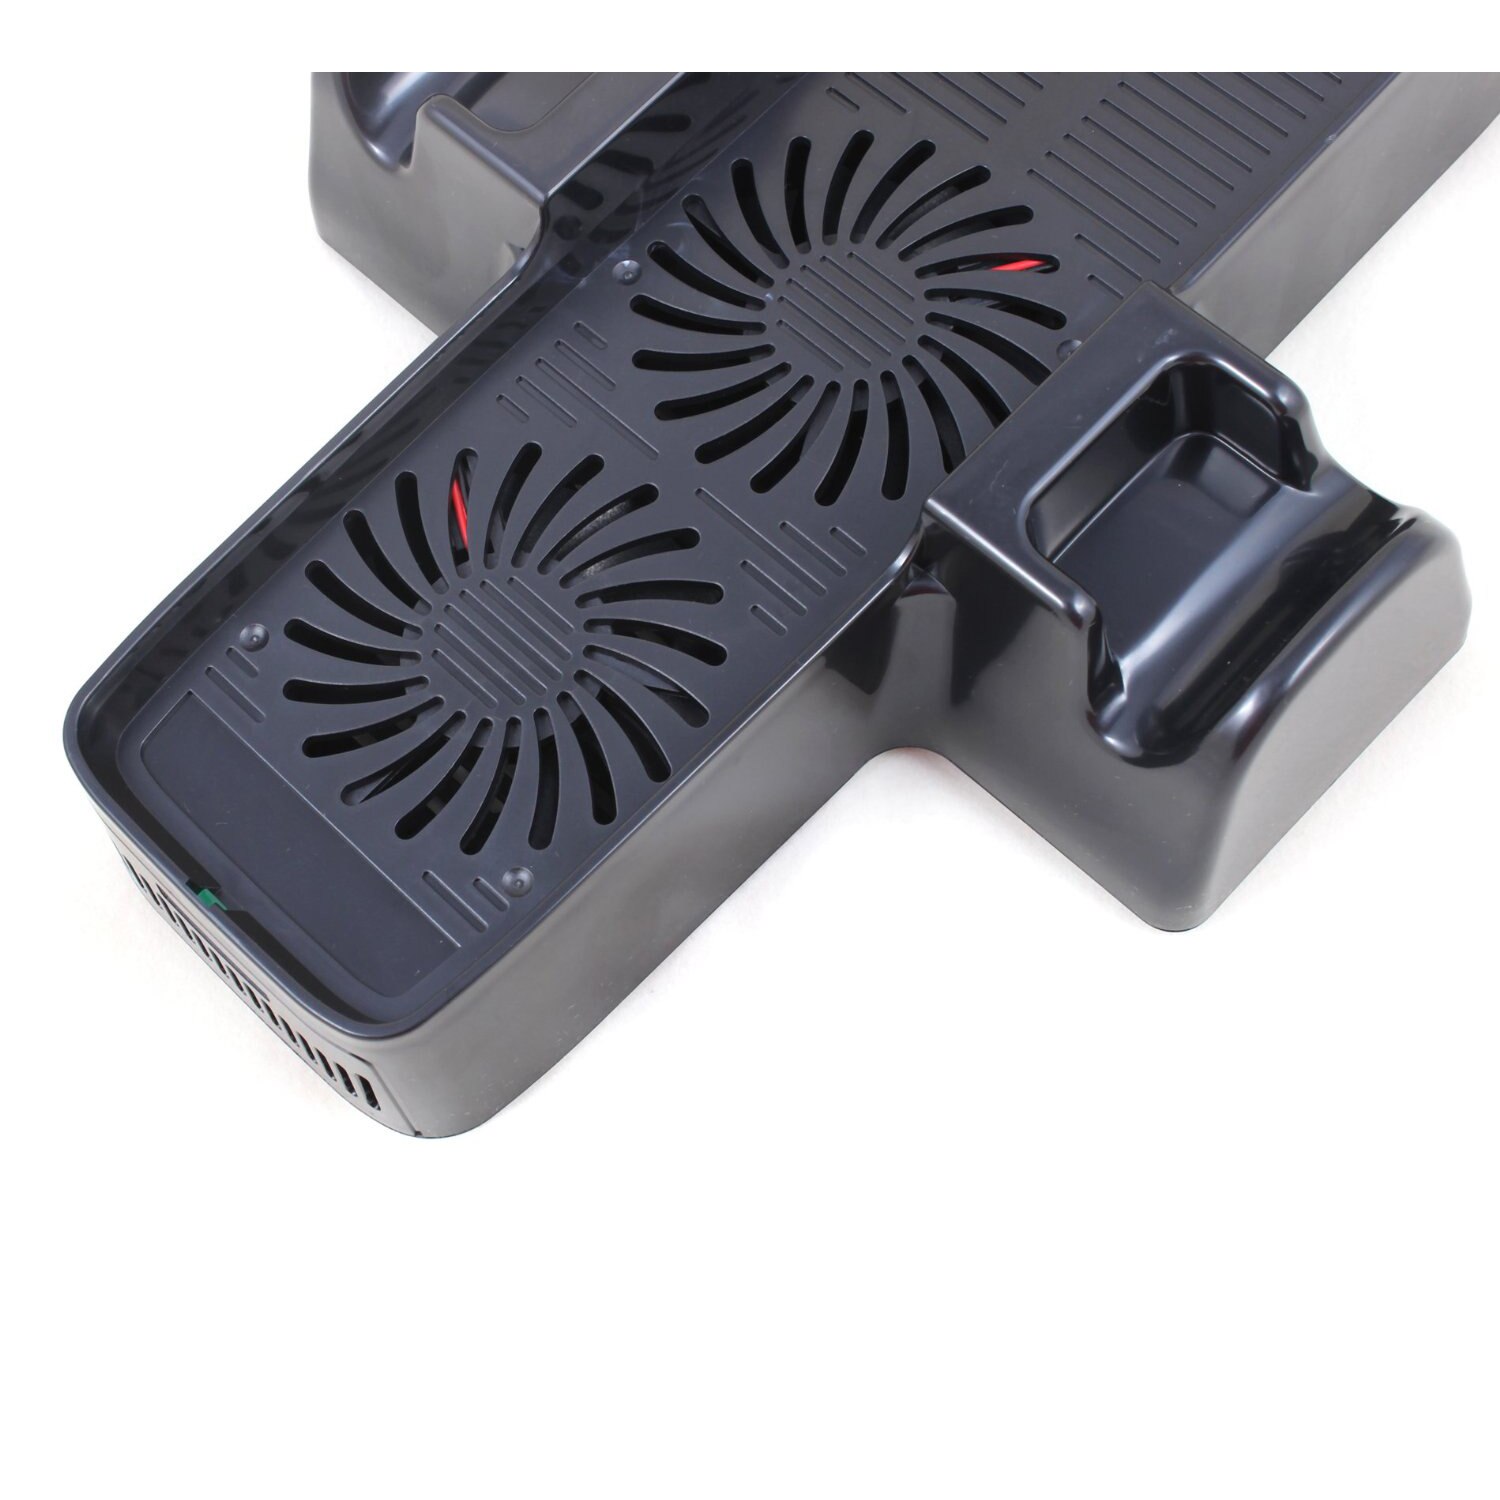 3 in 1 Vertical Charging Dock Station Cooling Fan Stand for Xbox 360 Slim Black